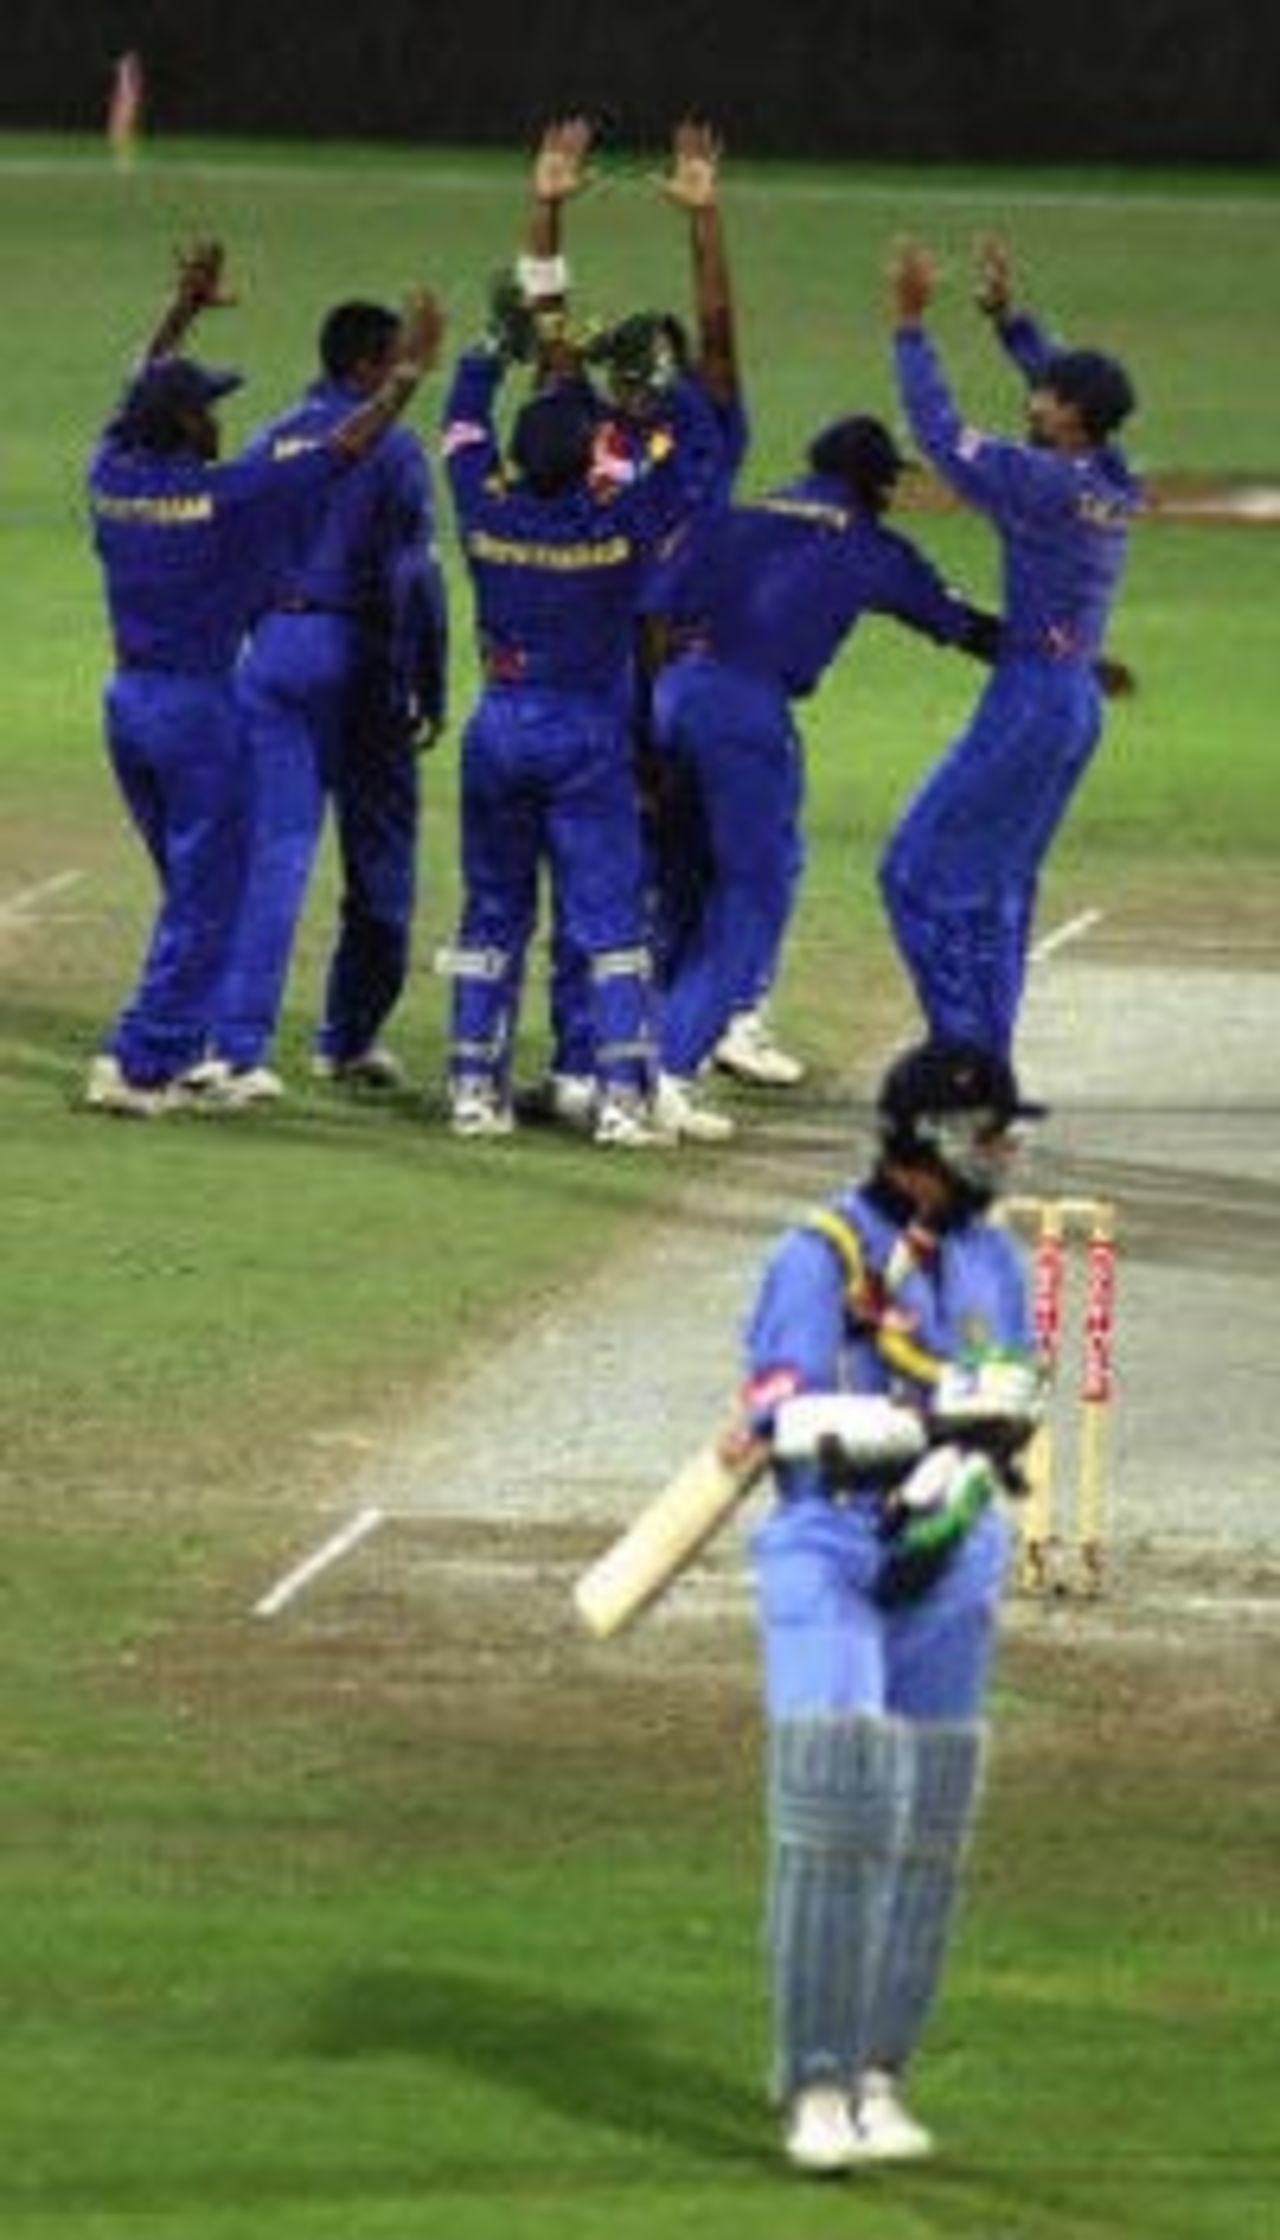 The Lankans celebrate the fall of a key wicket in their encounter against India, Coca-Cola Champions Trophy, 2000/01, 6th Match, India v Sri Lanka, Sharjah C.A. Stadium, 27 October 2000.